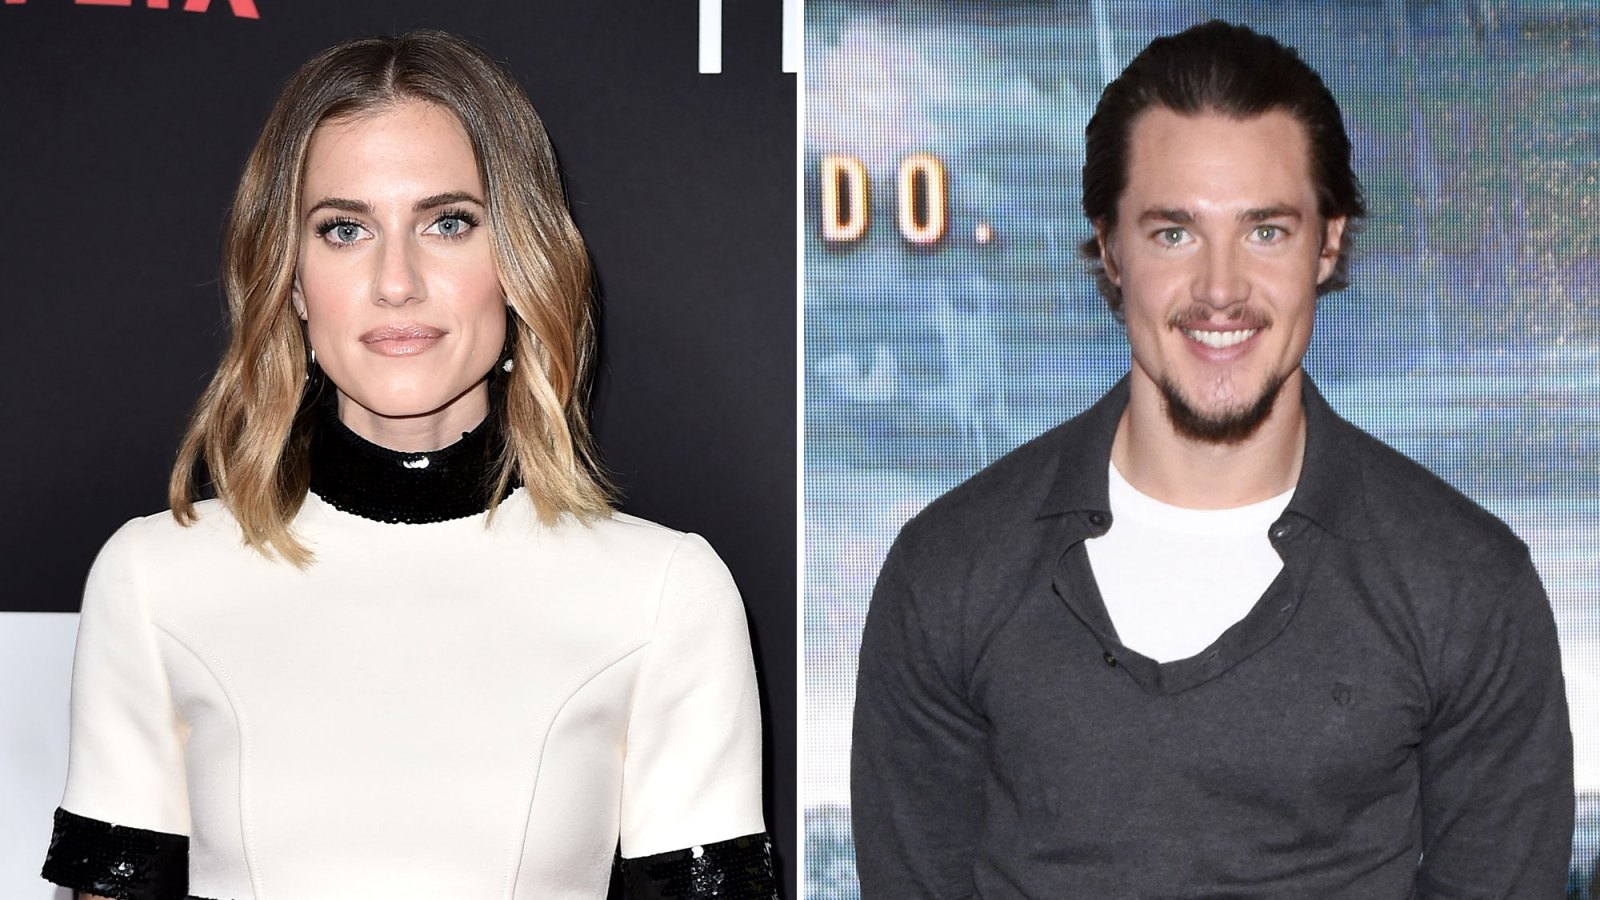 Allison Williams and Alexander Dreymon Quietly Welcomed 1st Child Amid Low-Key Romance